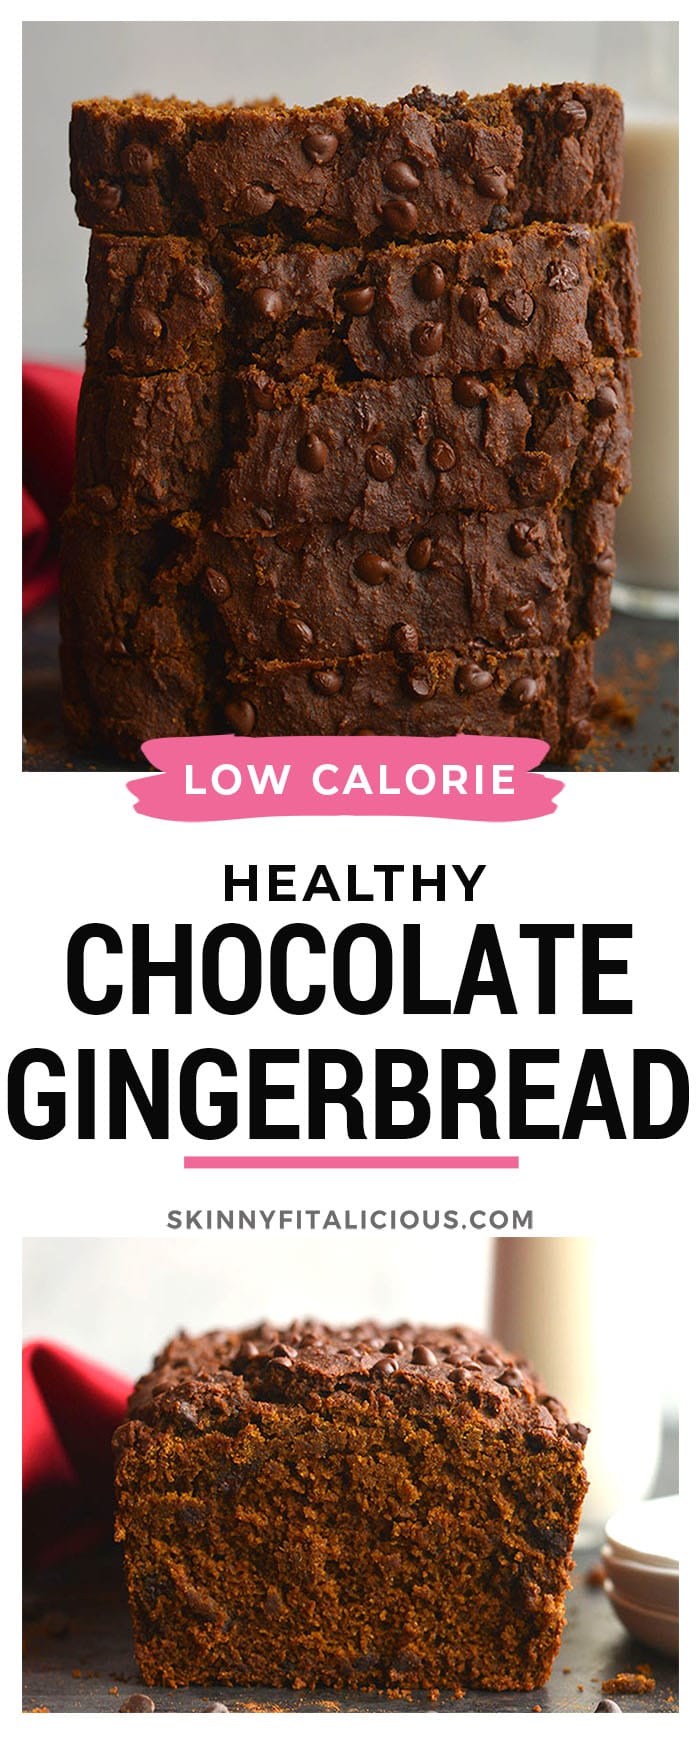 Healthy Chocolate Gingerbread Loaf! Made gluten free and lower in sugar with applesauce, this warm molasses and ginger spiced bread is perfect for a snack or breakfast.